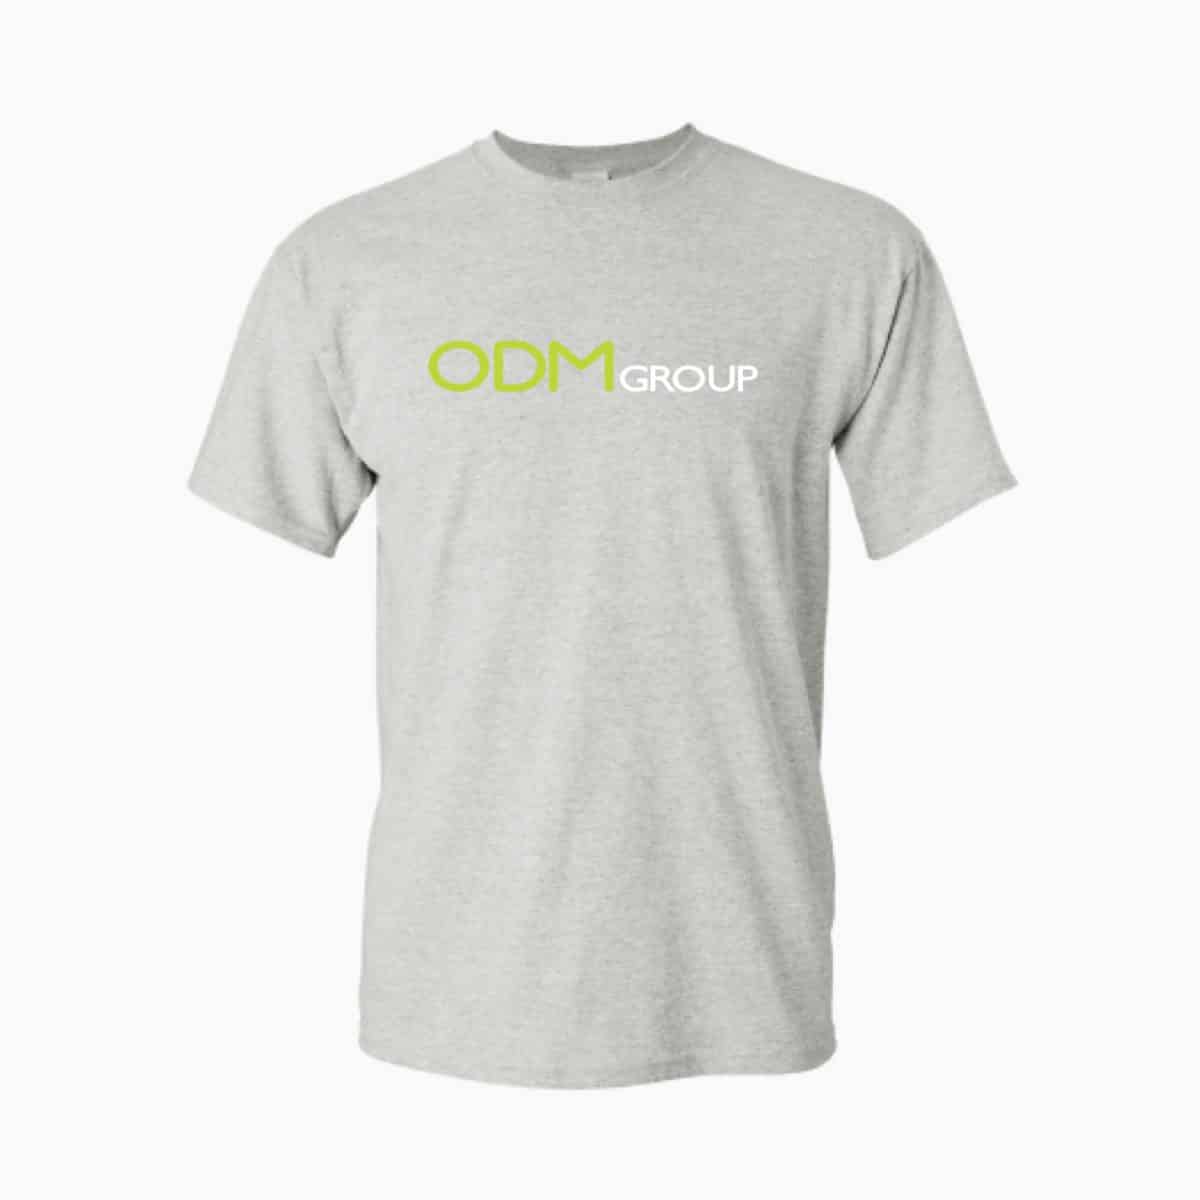 ODM Group branded gray t-shirt.